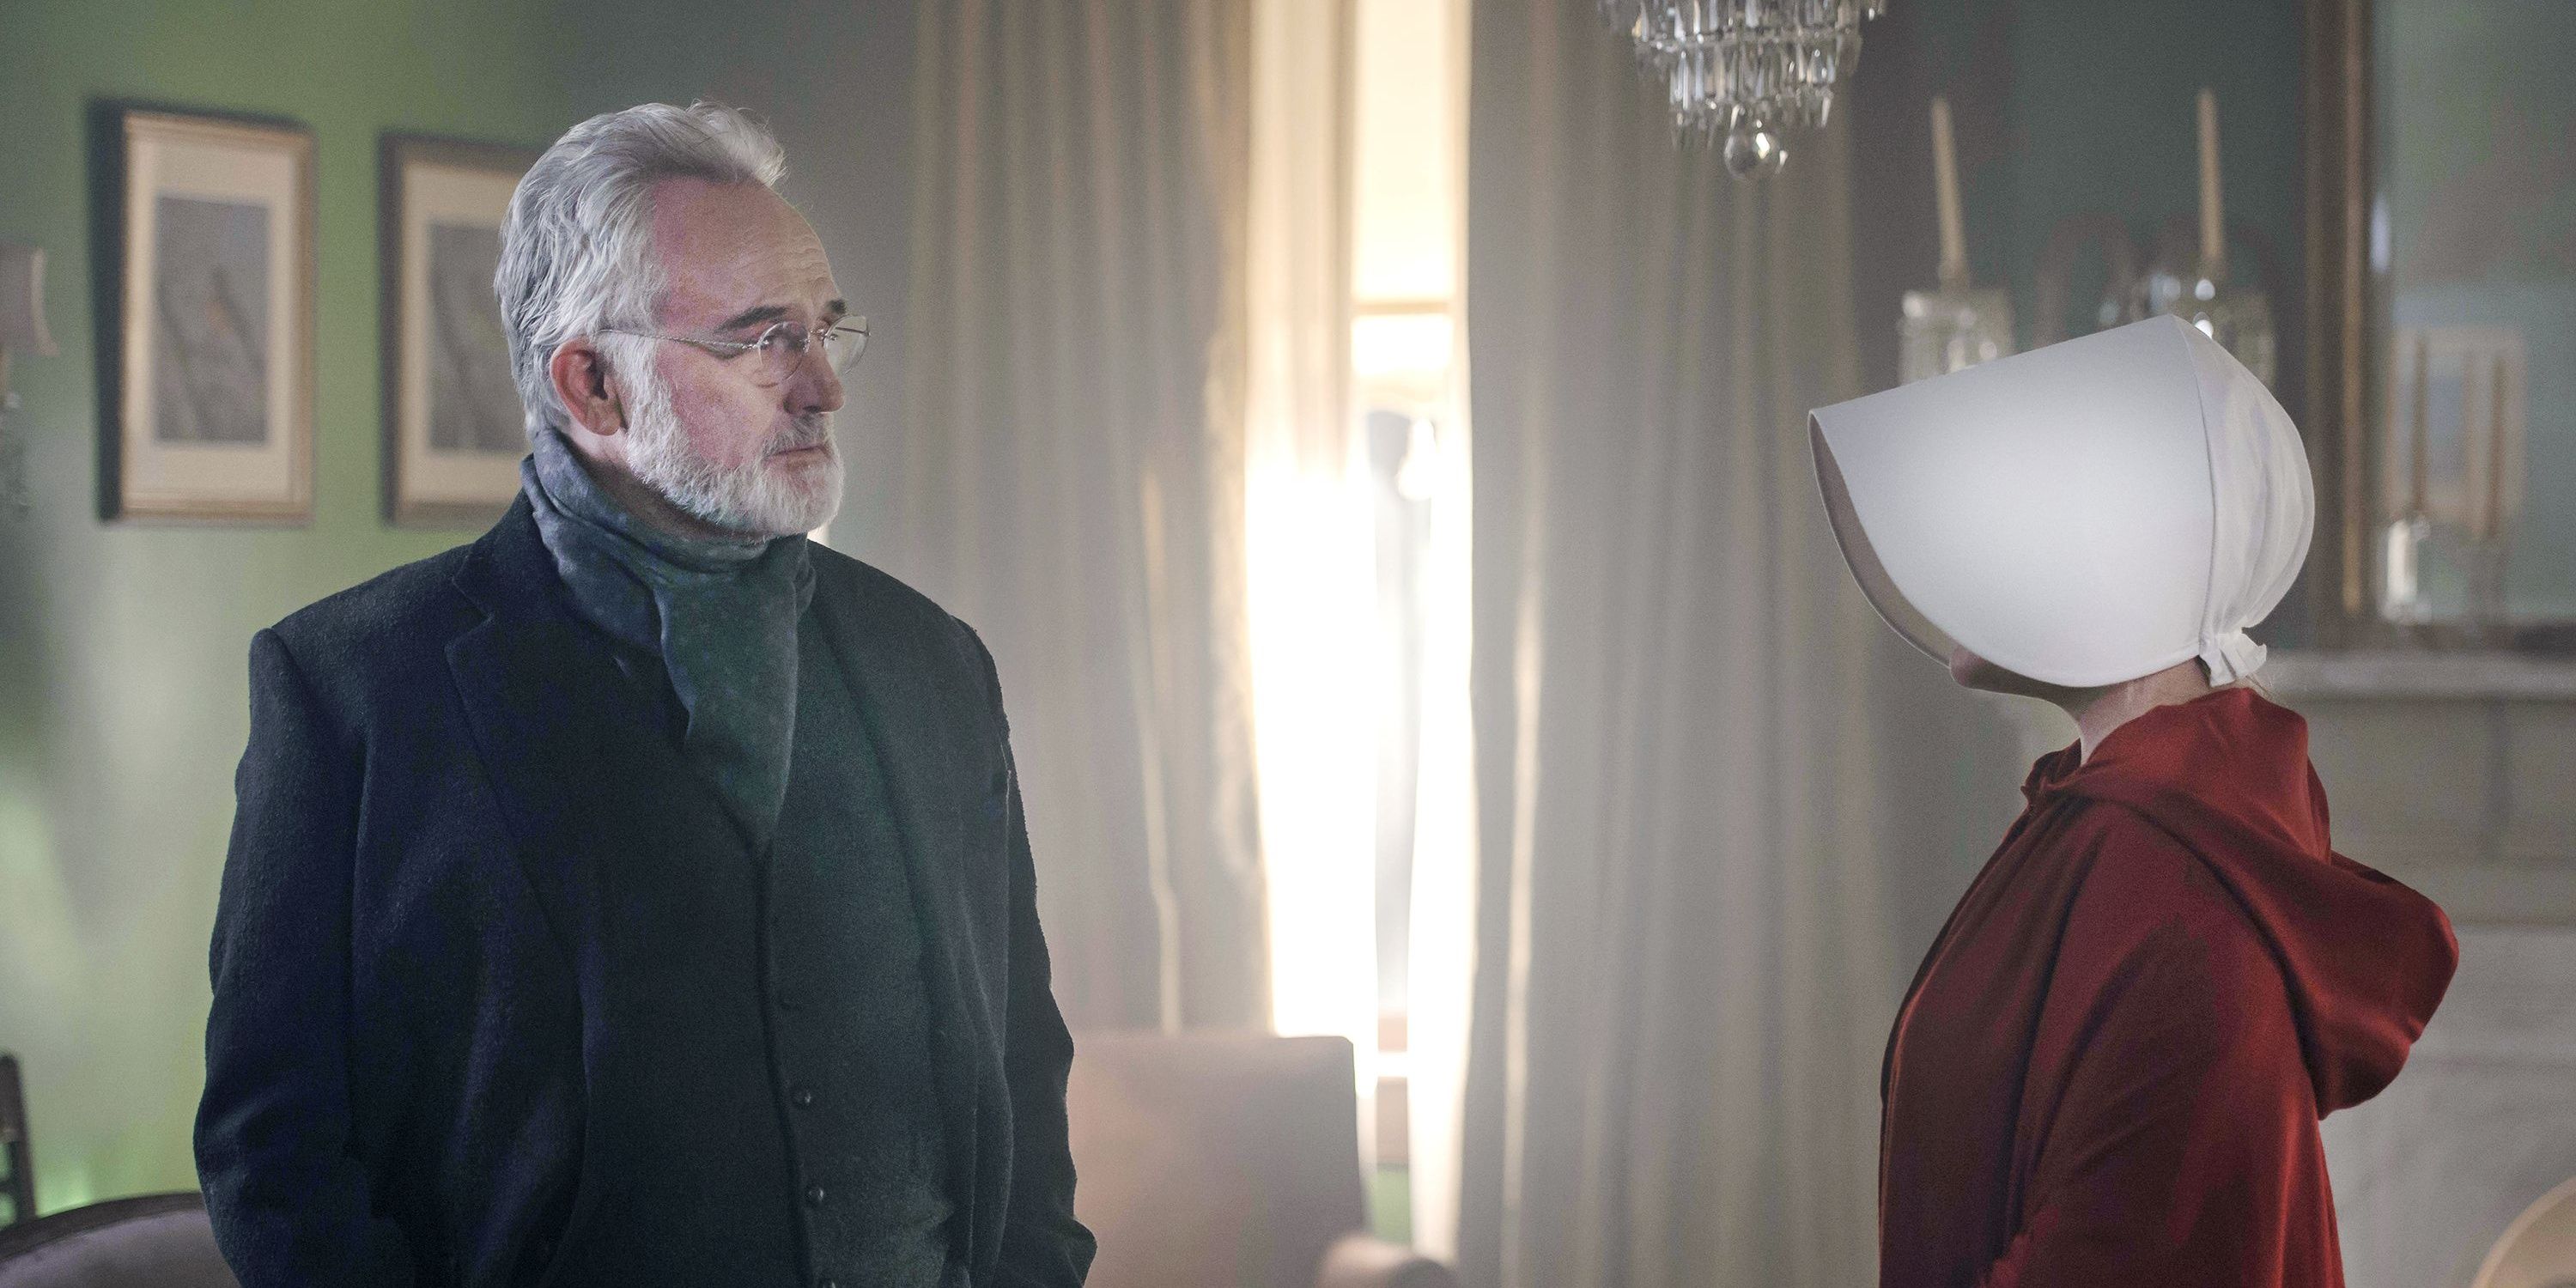 Commander Lawrence and June in The Handmaid's Tale